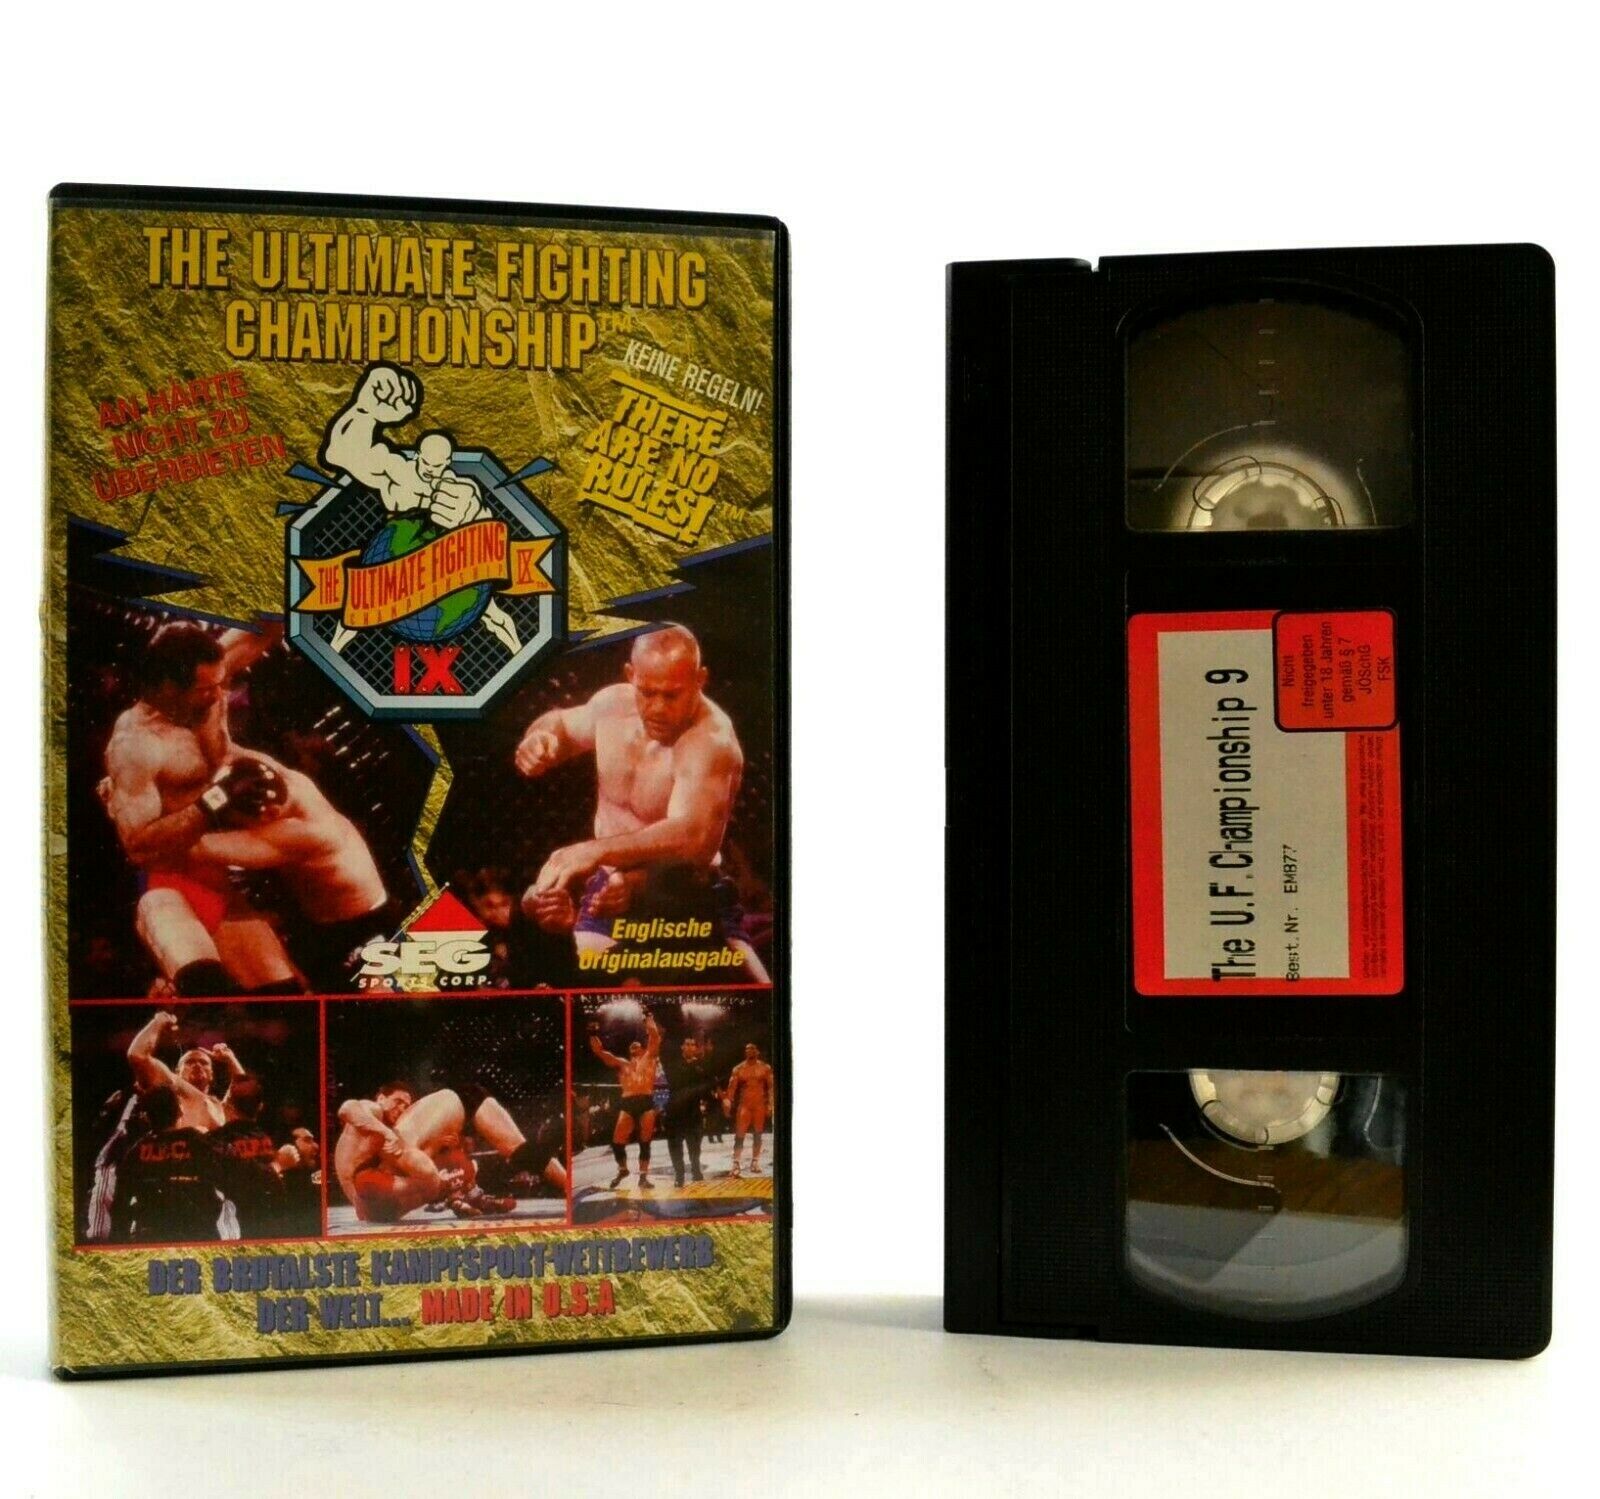 The Ultimate Fighting Championship 9 - Martial Arts - Don Frye - Mark Hall - VHS-